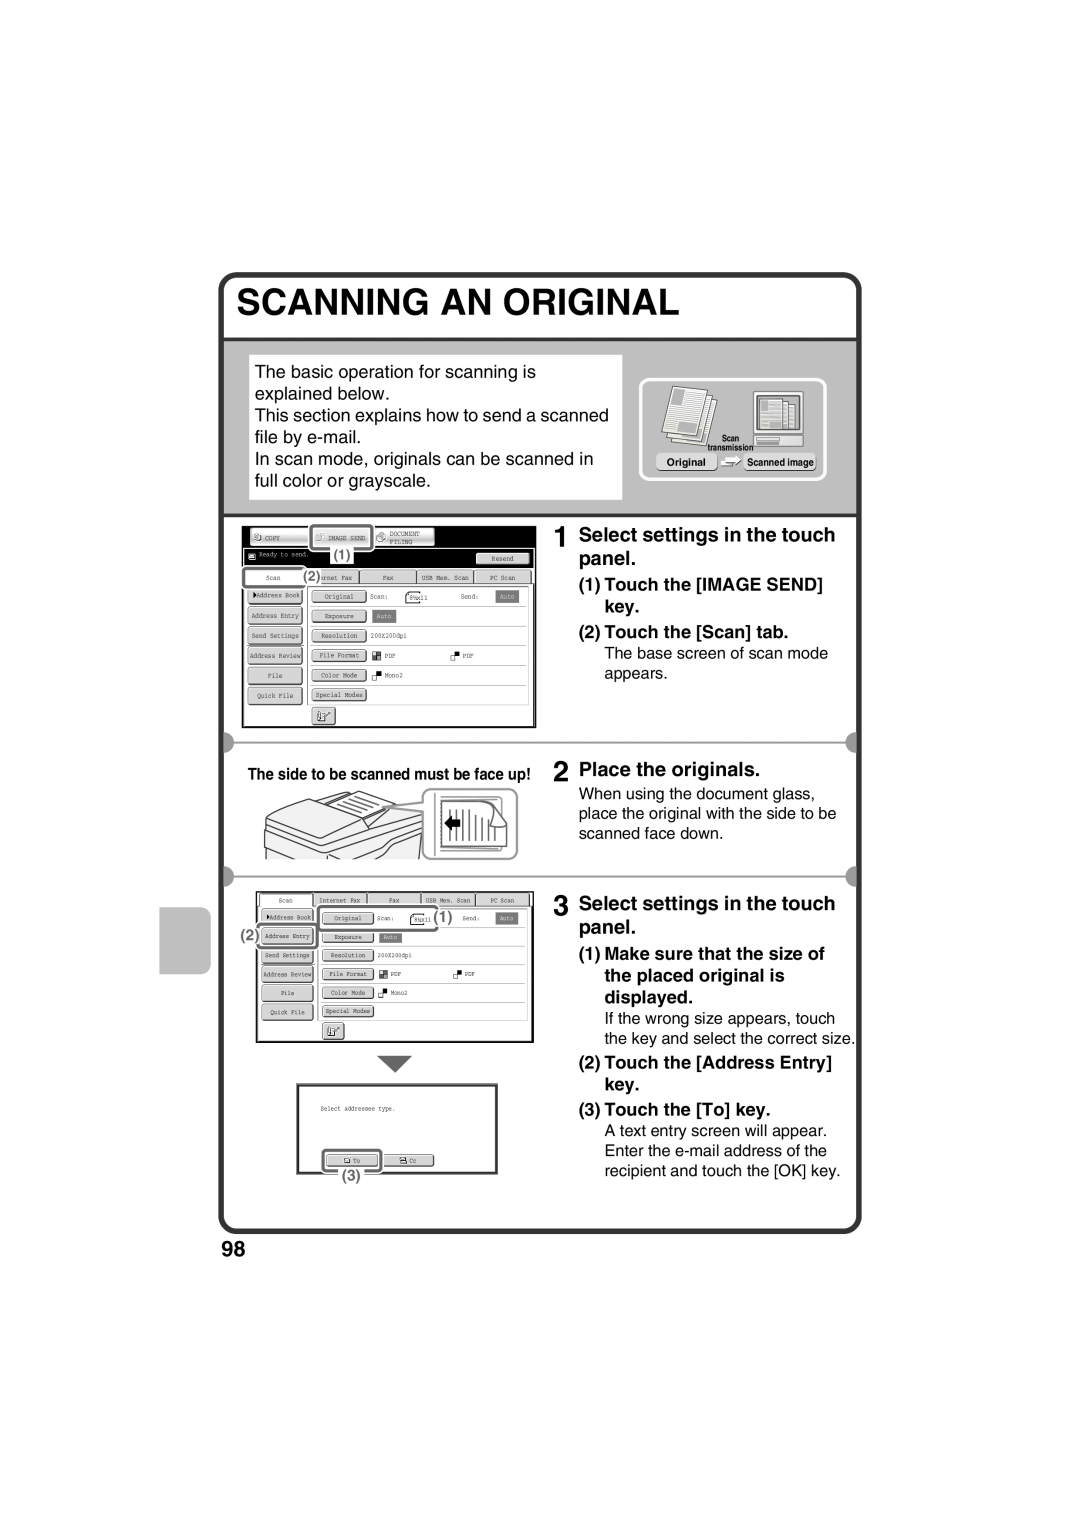 Sharp MX-B401 Scanning An Original, Select settings in the touch panel, Touch the IMAGE SEND key 2 Touch the Scan tab 